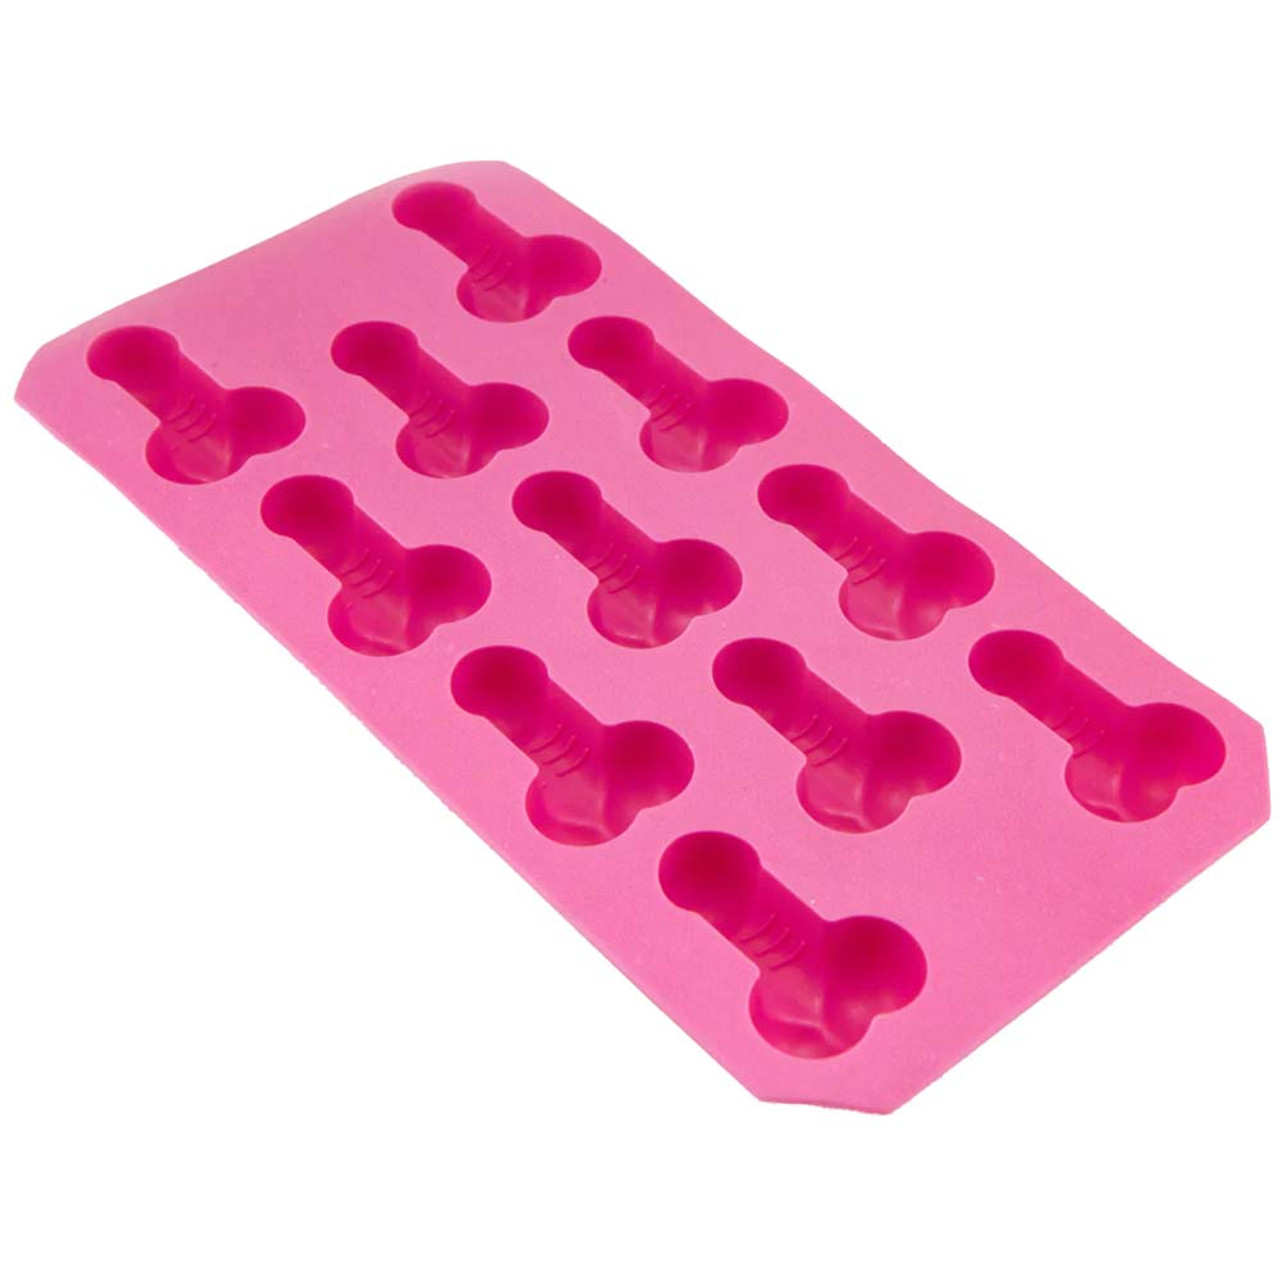 https://cdn11.bigcommerce.com/s-1n8r405nxd/images/stencil/1280x1280/products/11627/24356/93246-F2-Pink-tray-of-11-small-penis-molds__30694.1682436334.jpg?c=2